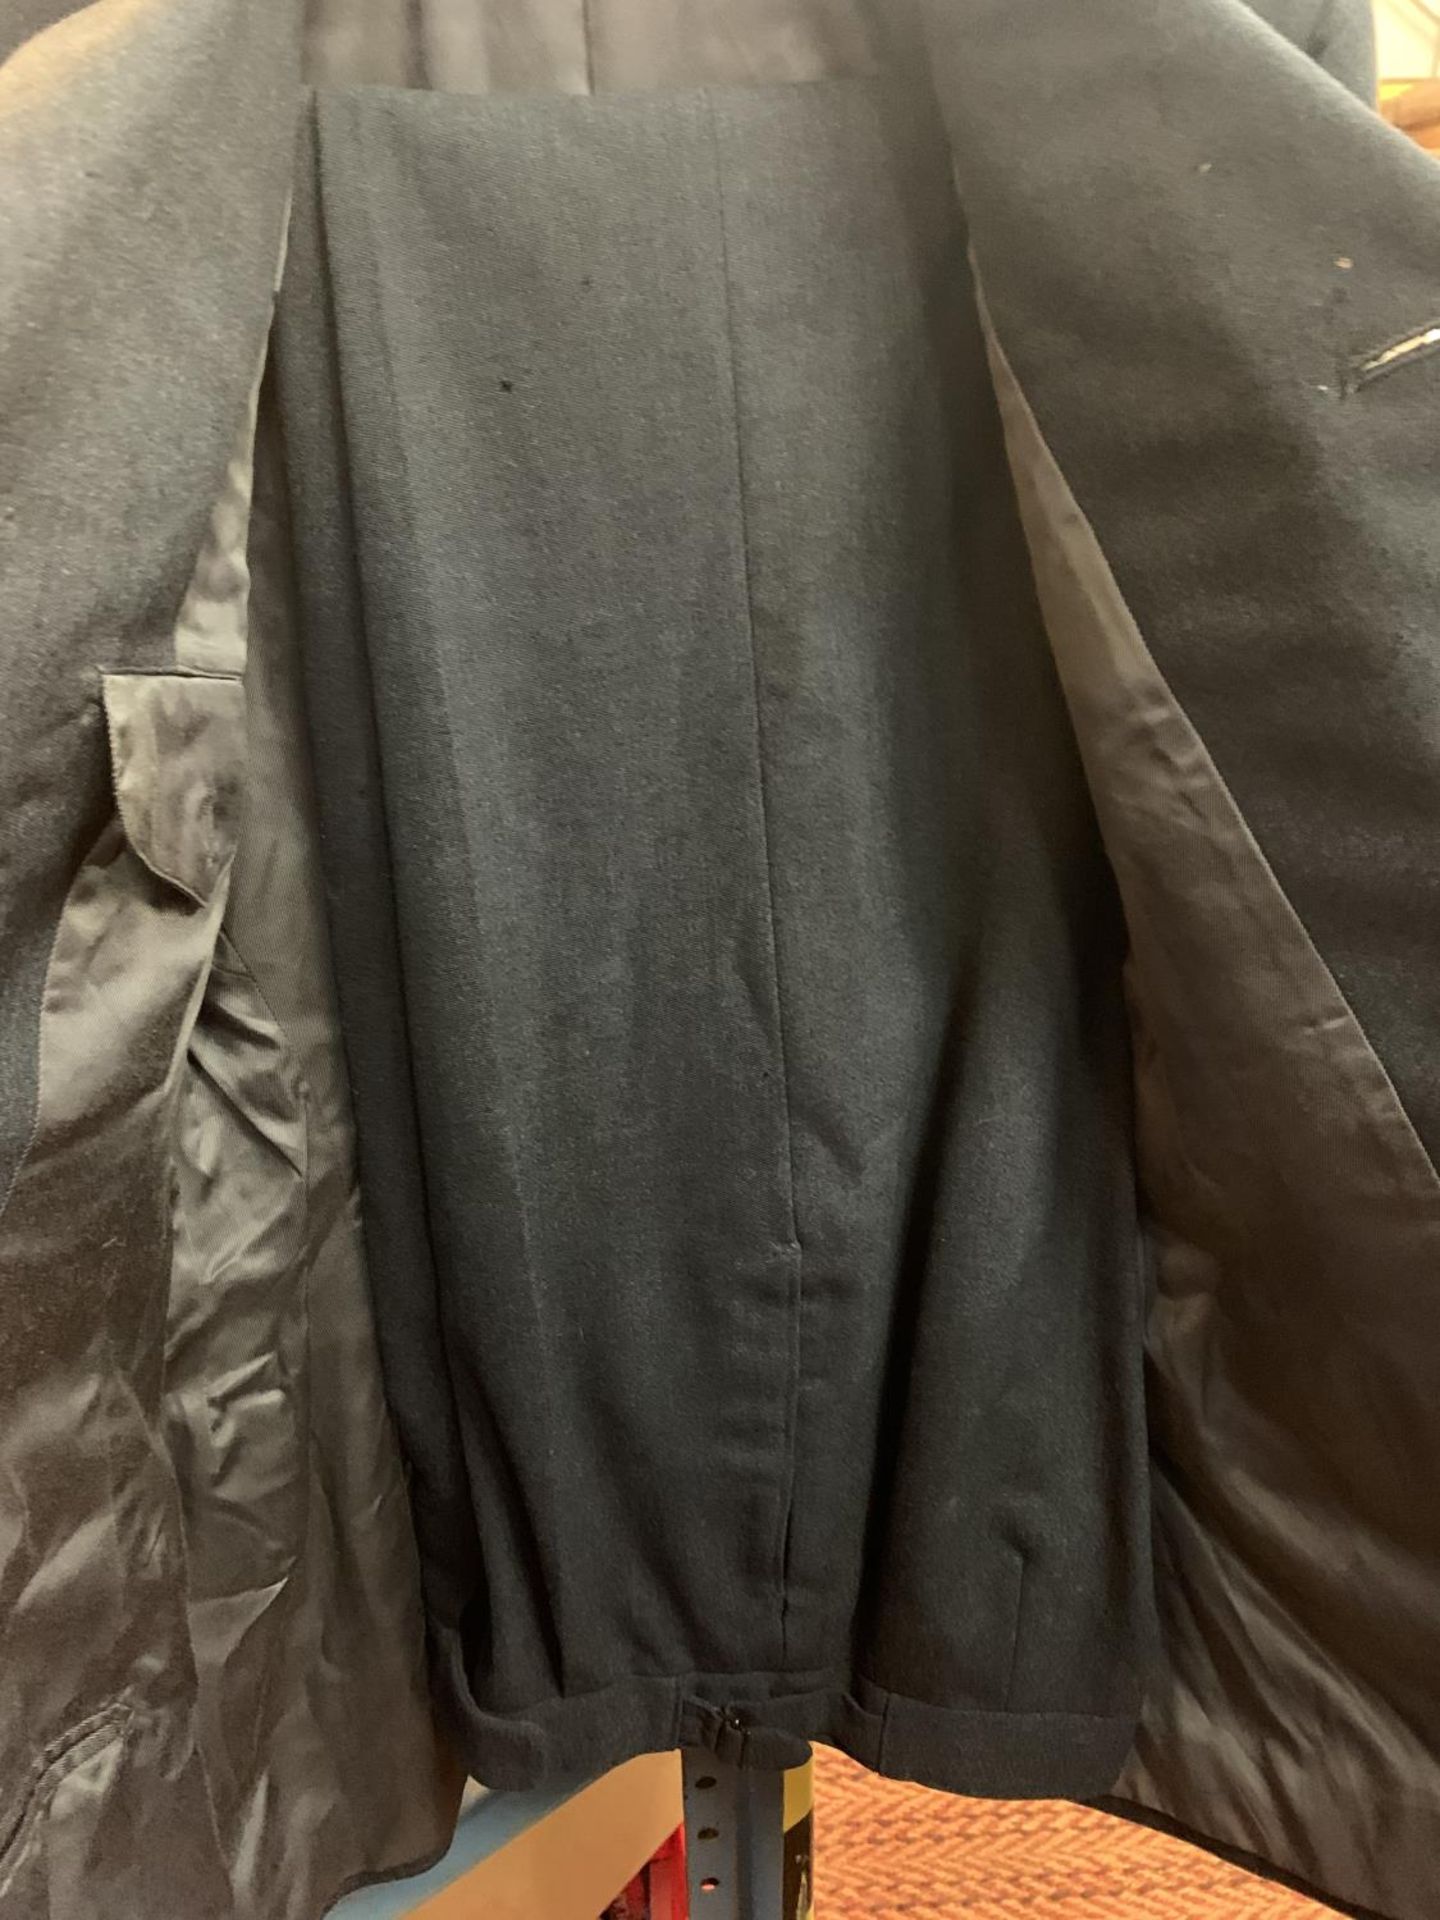 AN RAF JACKET AND TROUSERS DATED 1970 - Image 4 of 6